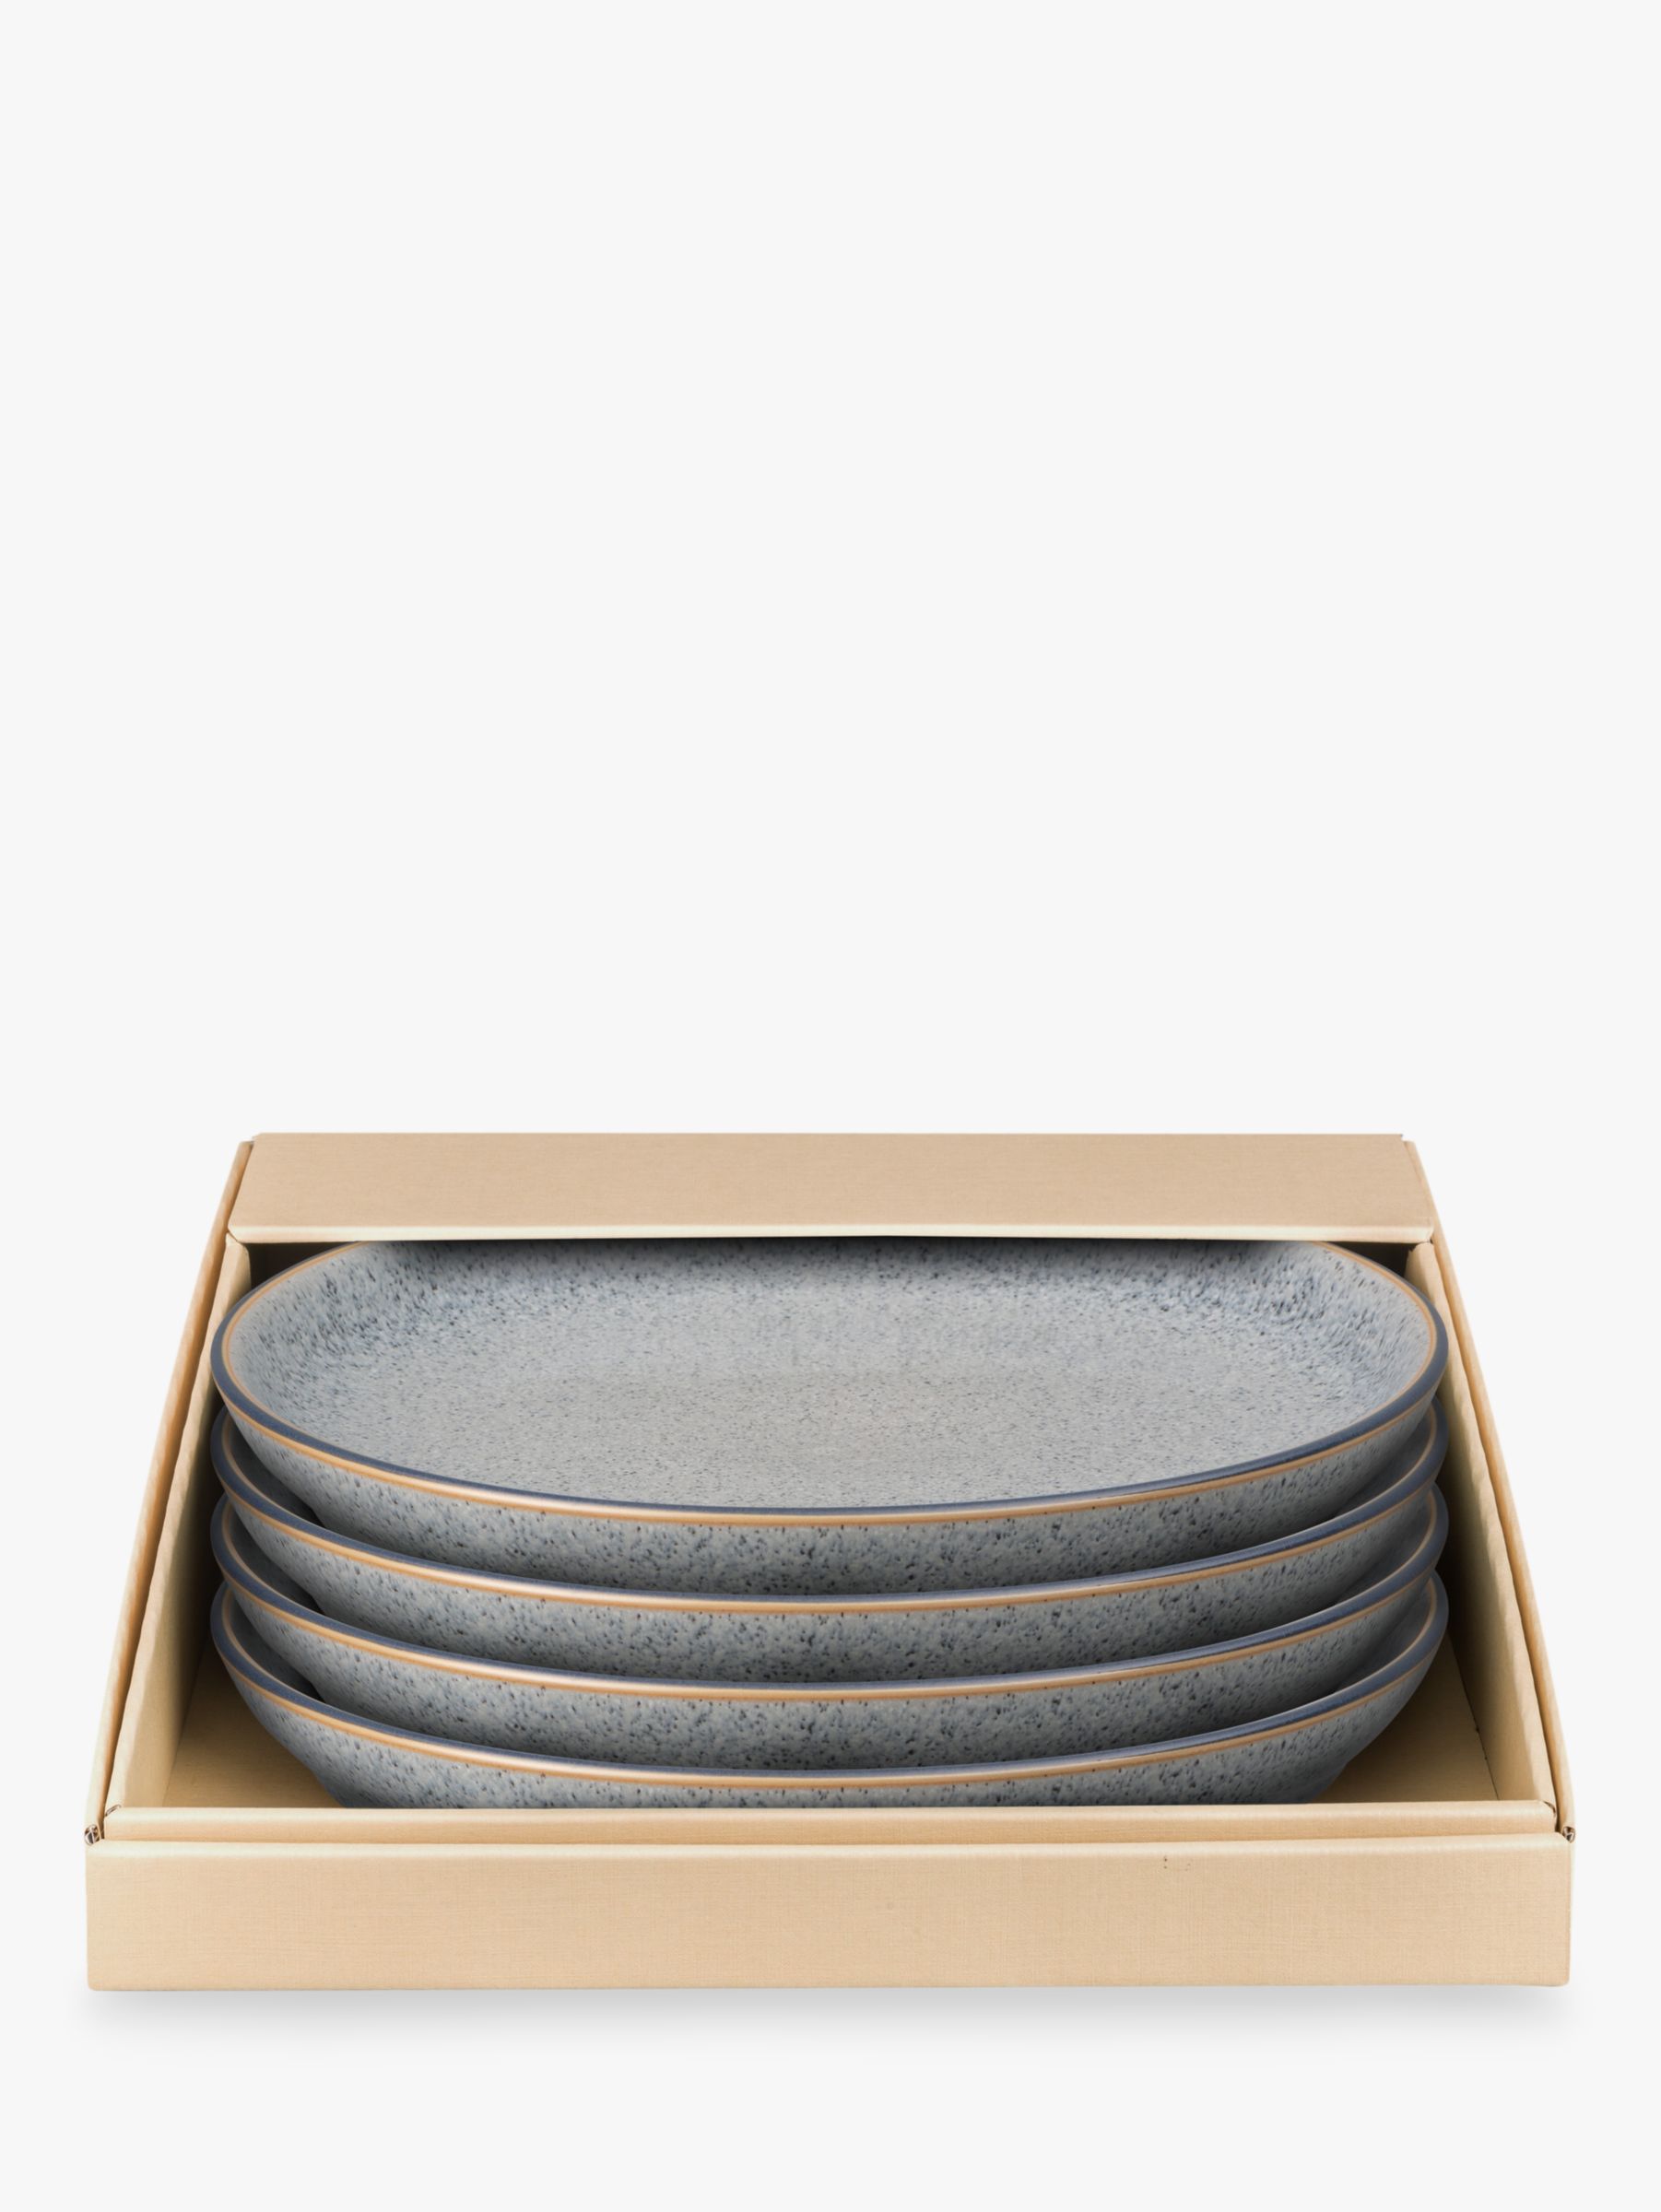 Denby Studio Grey Small Coupe Plate – Domaci